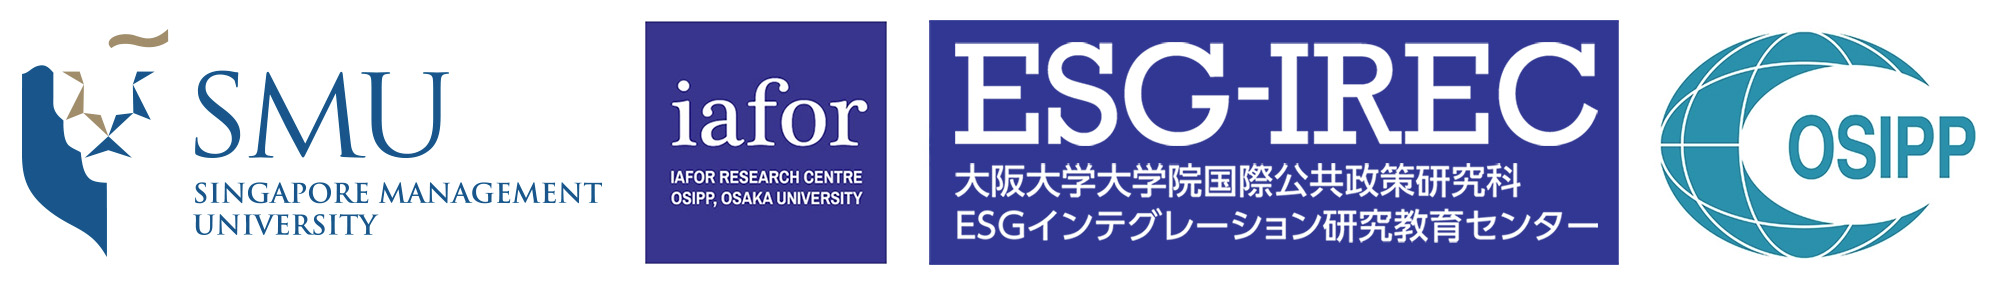 Singapore Management University (SMU), The IAFOR Research Centre (IRC), and the ESG-Integration Research and Education Centre (ESG-IREC) at the Osaka School of International Public Policy (OSIPP)